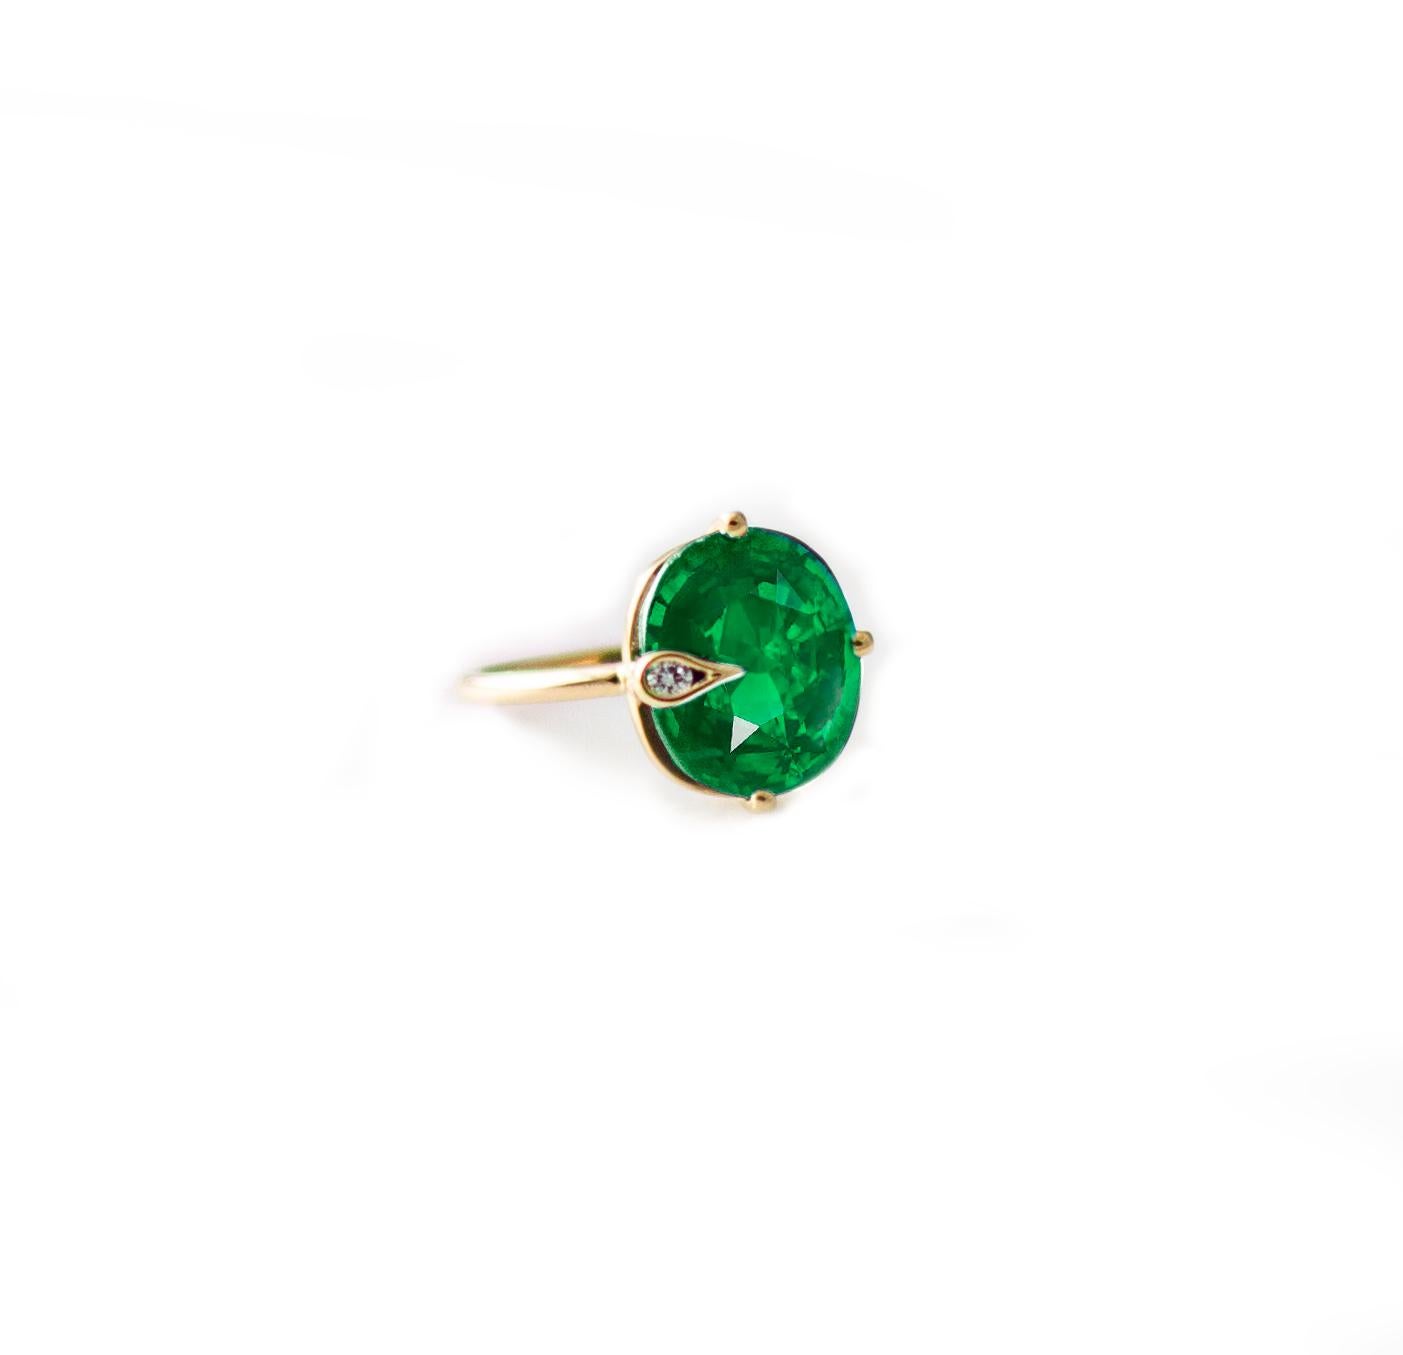 
This Engagement Peacock ring is in 18 karat yellow gold with unheated untreated natural oval vivid green tsavorite, GRS certified, 4,4 carats, 11,44x8,91x5,9 mm. The ring is easy to wear, and the gem catches eye's attention. 
We use top natural